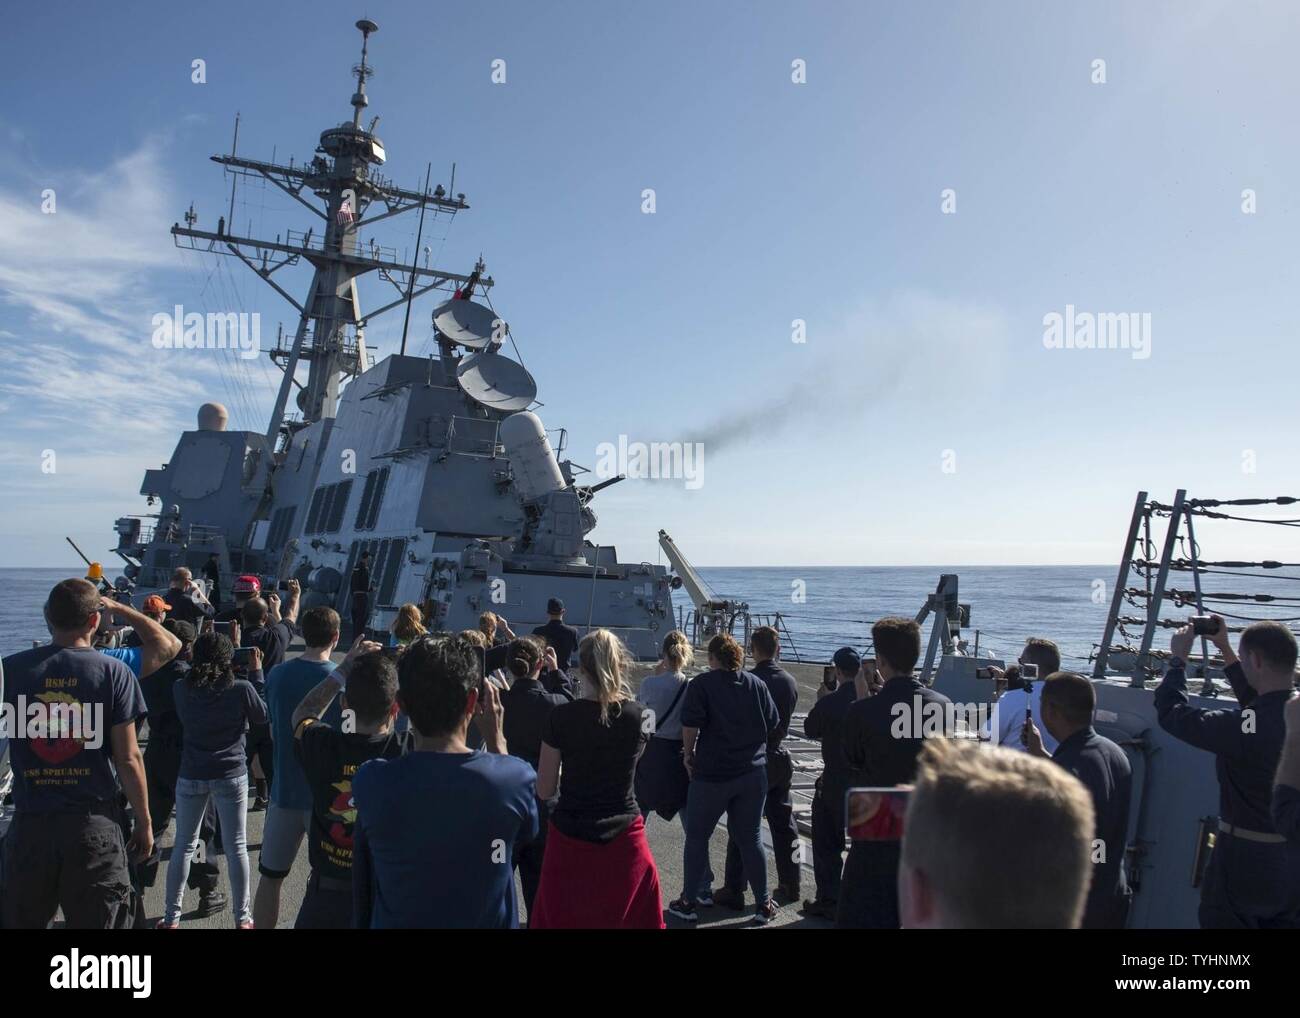 OCEAN (Nov. 9, 2016) Sailors assigned to the guided-missile destroyer USS Spruance (DDG 111) and embarked friends and family members aboard during a tiger cruise watch a demonstration of the ship’s close-in weapons system in the Pacific Ocean, Nov. 9, 2016. Spruance and the guided-missile destroyers USS Decatur (DDG 73) and USS Momsen (DDG 92), along with embarked “Warbirds” and “Devilfish” detachments of Helicopter Maritime Strike Squadron (HSM) 49, are finishing up a seven-month deployment in support of maritime security and stability in the Indo-Asia-Pacific as part of a U.S. 3rd Fleet Paci Stock Photo